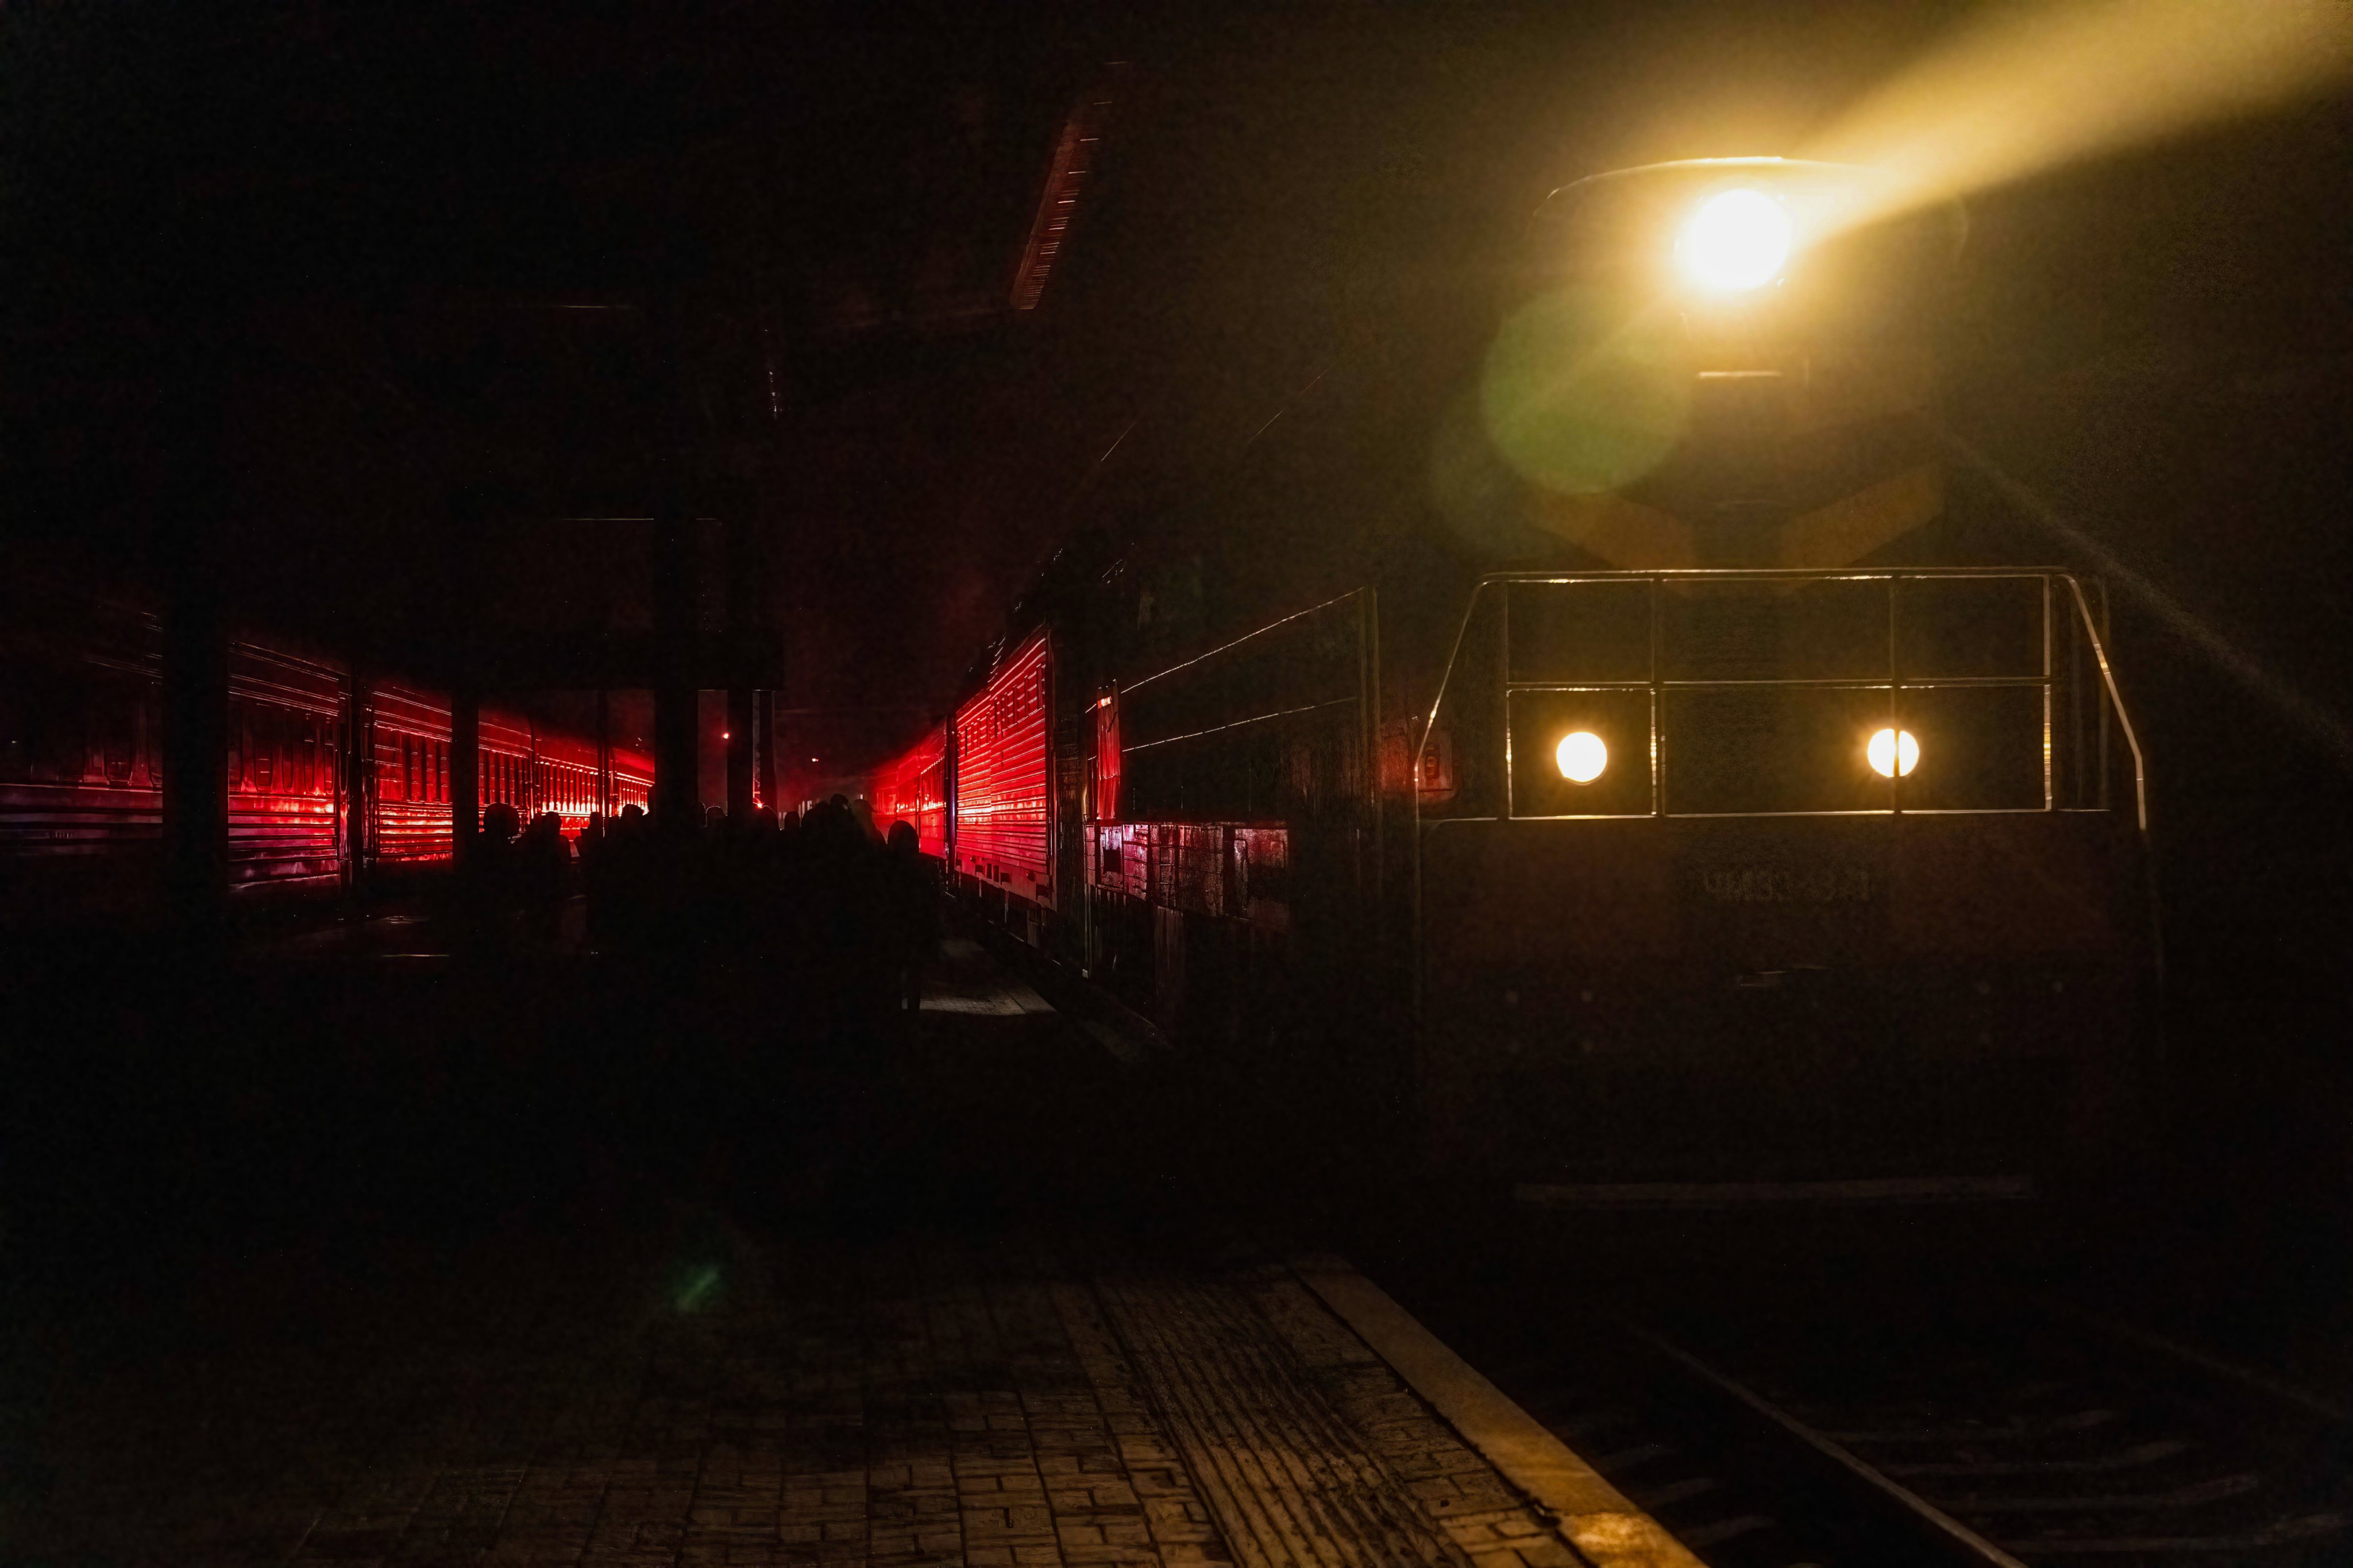 A delayed train arrives in a dark train station in Dnipro